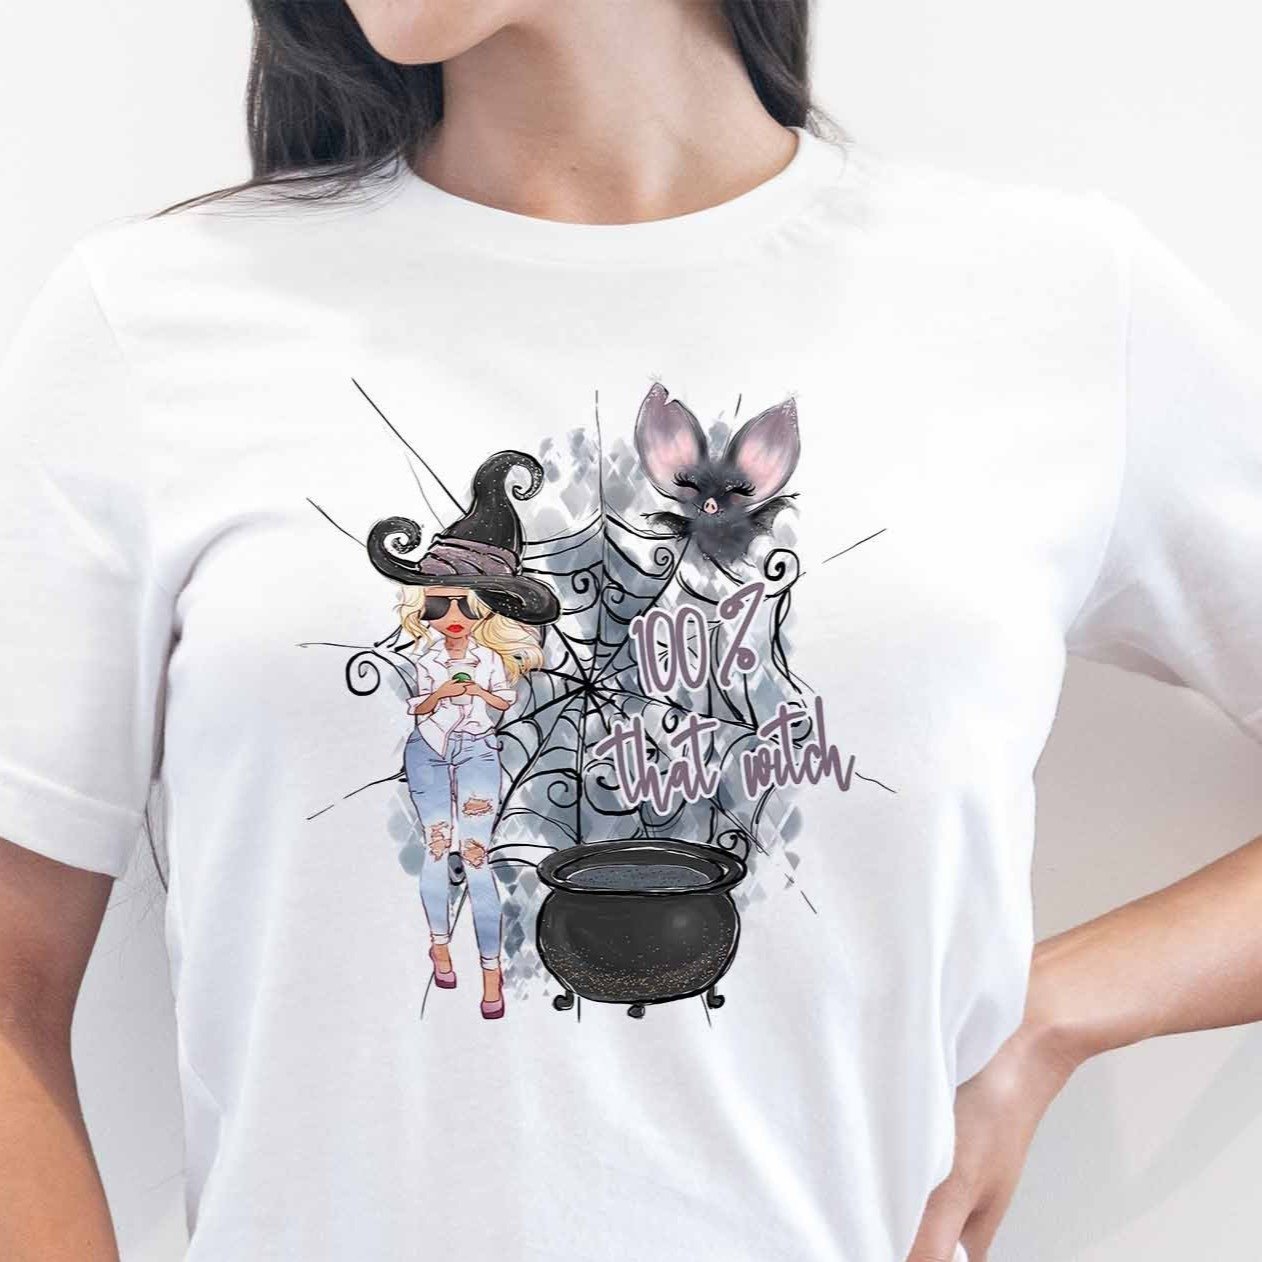 100% That Witch 2 Graphic Tee - My Custom Tee Party